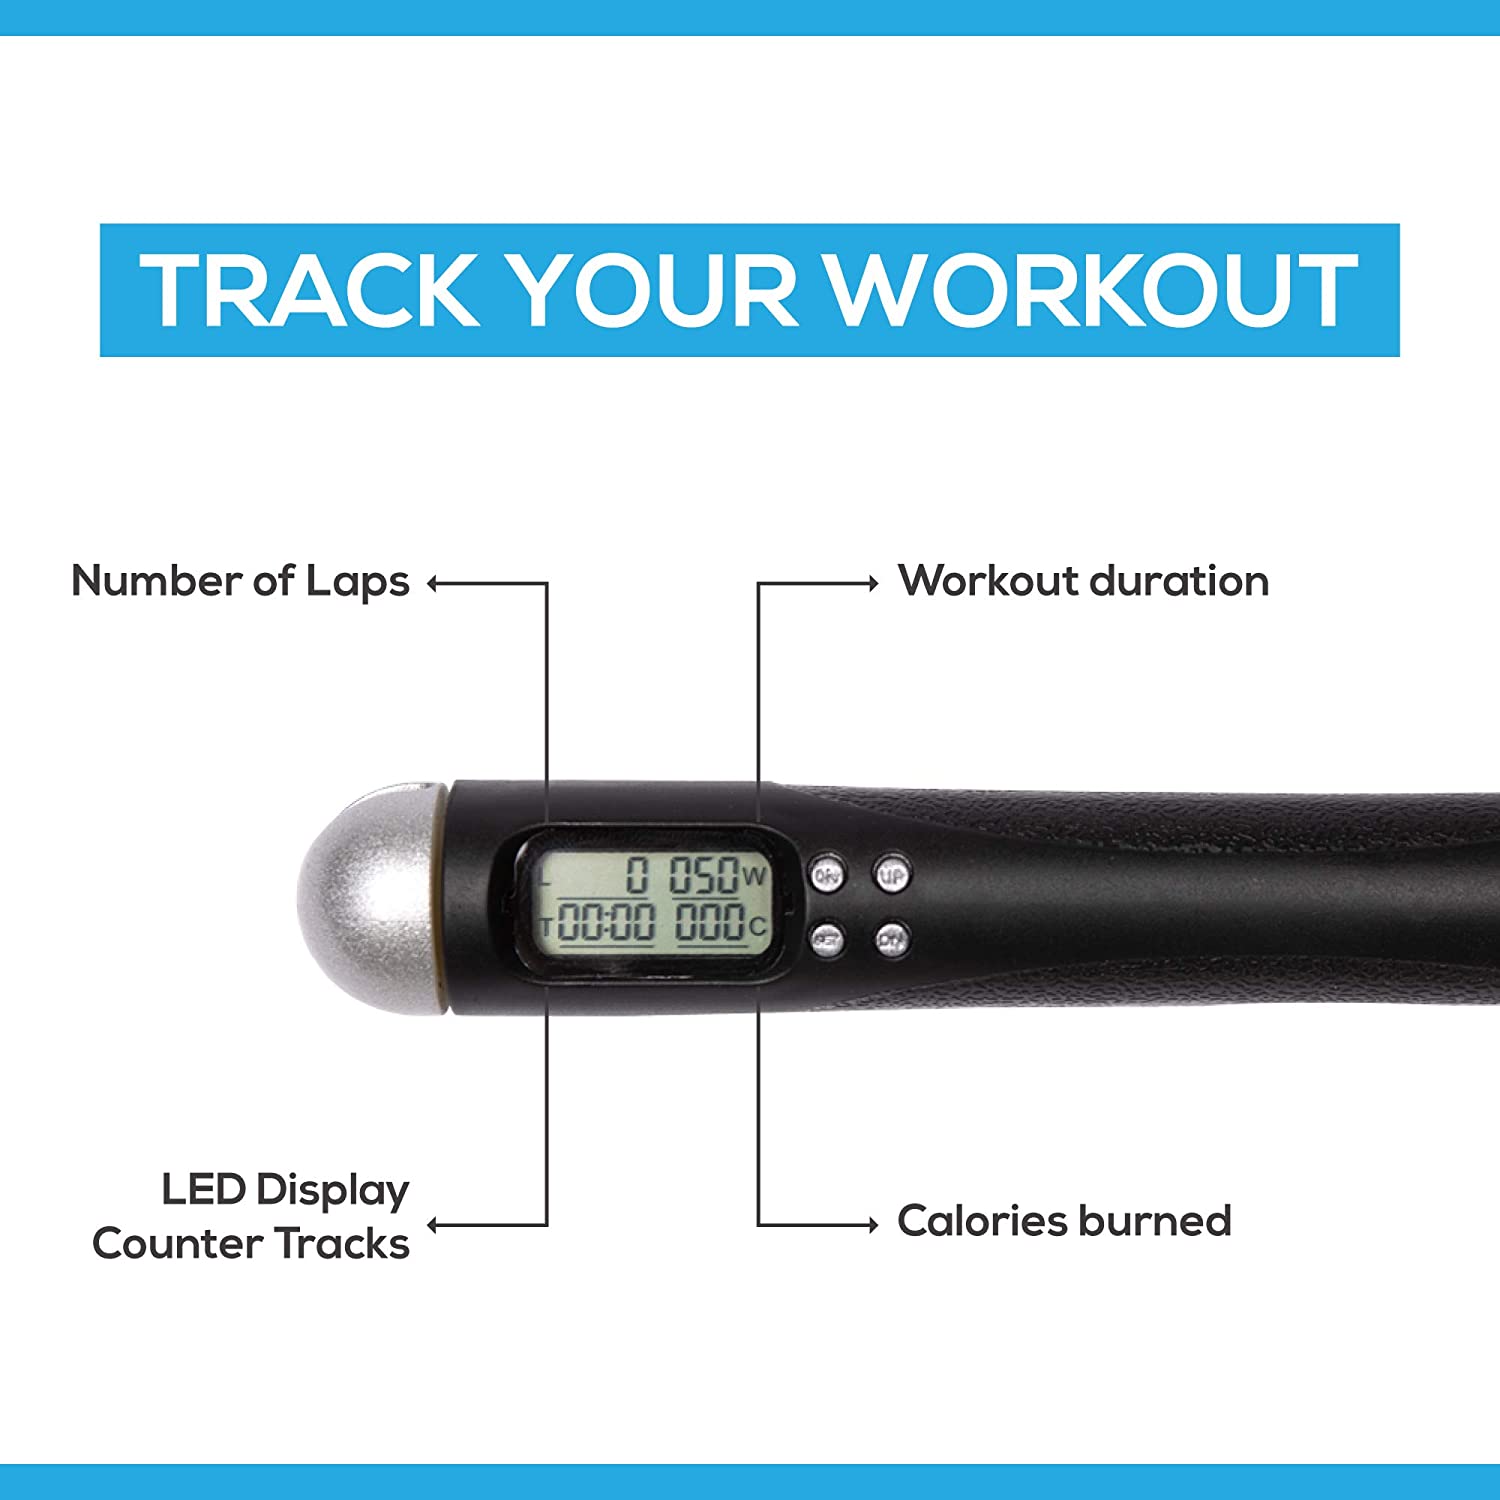 This Jump Rope Workout Torches Mega Calories - Fitbit Blog